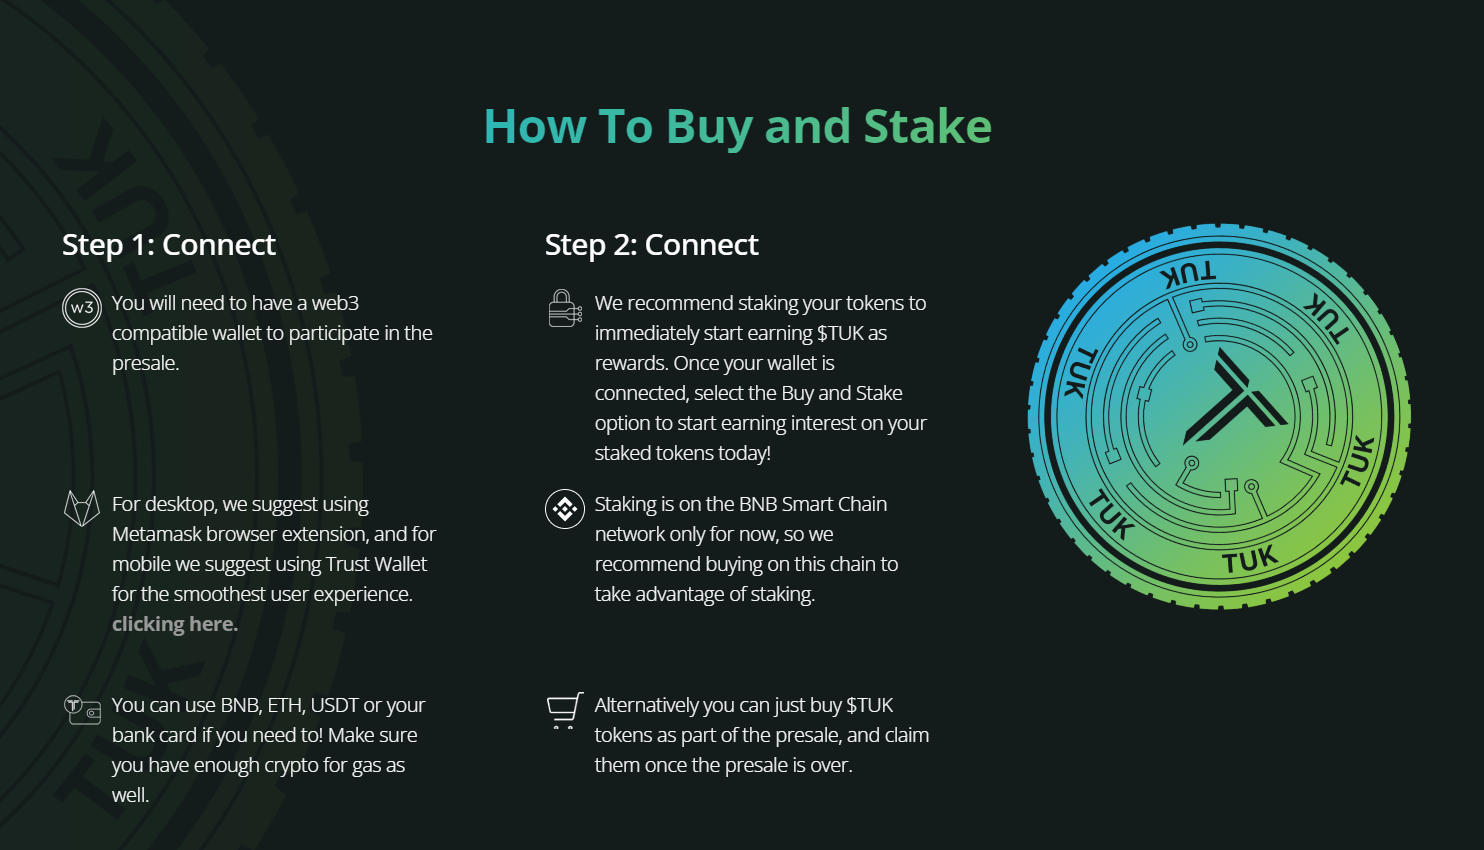 How to buy and bet on eTukTuk